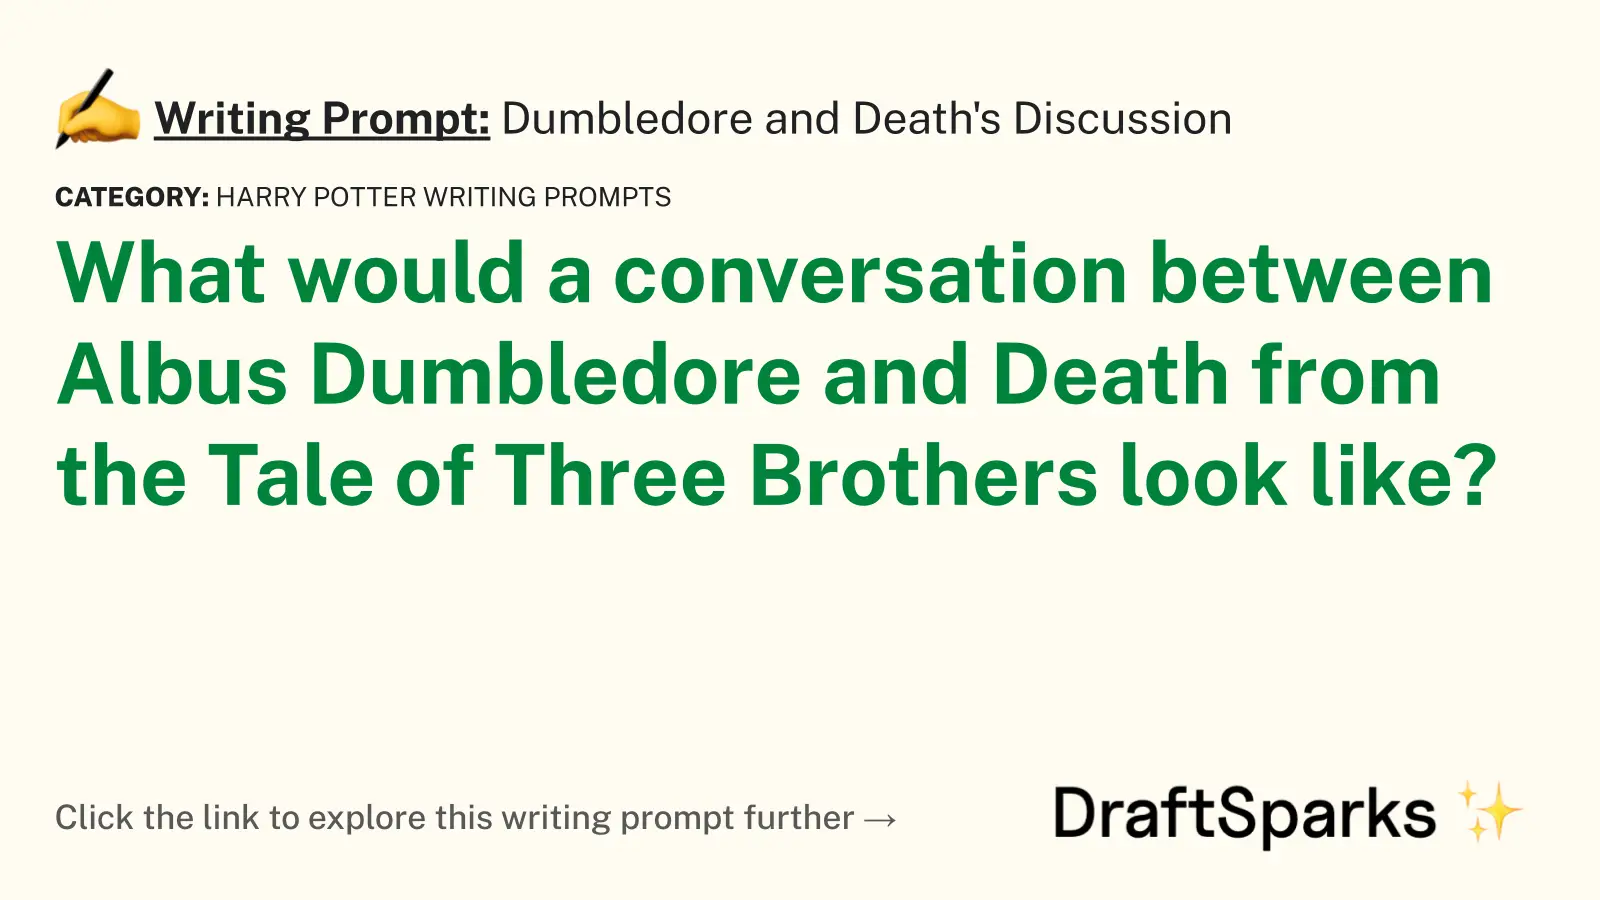 Dumbledore and Death’s Discussion